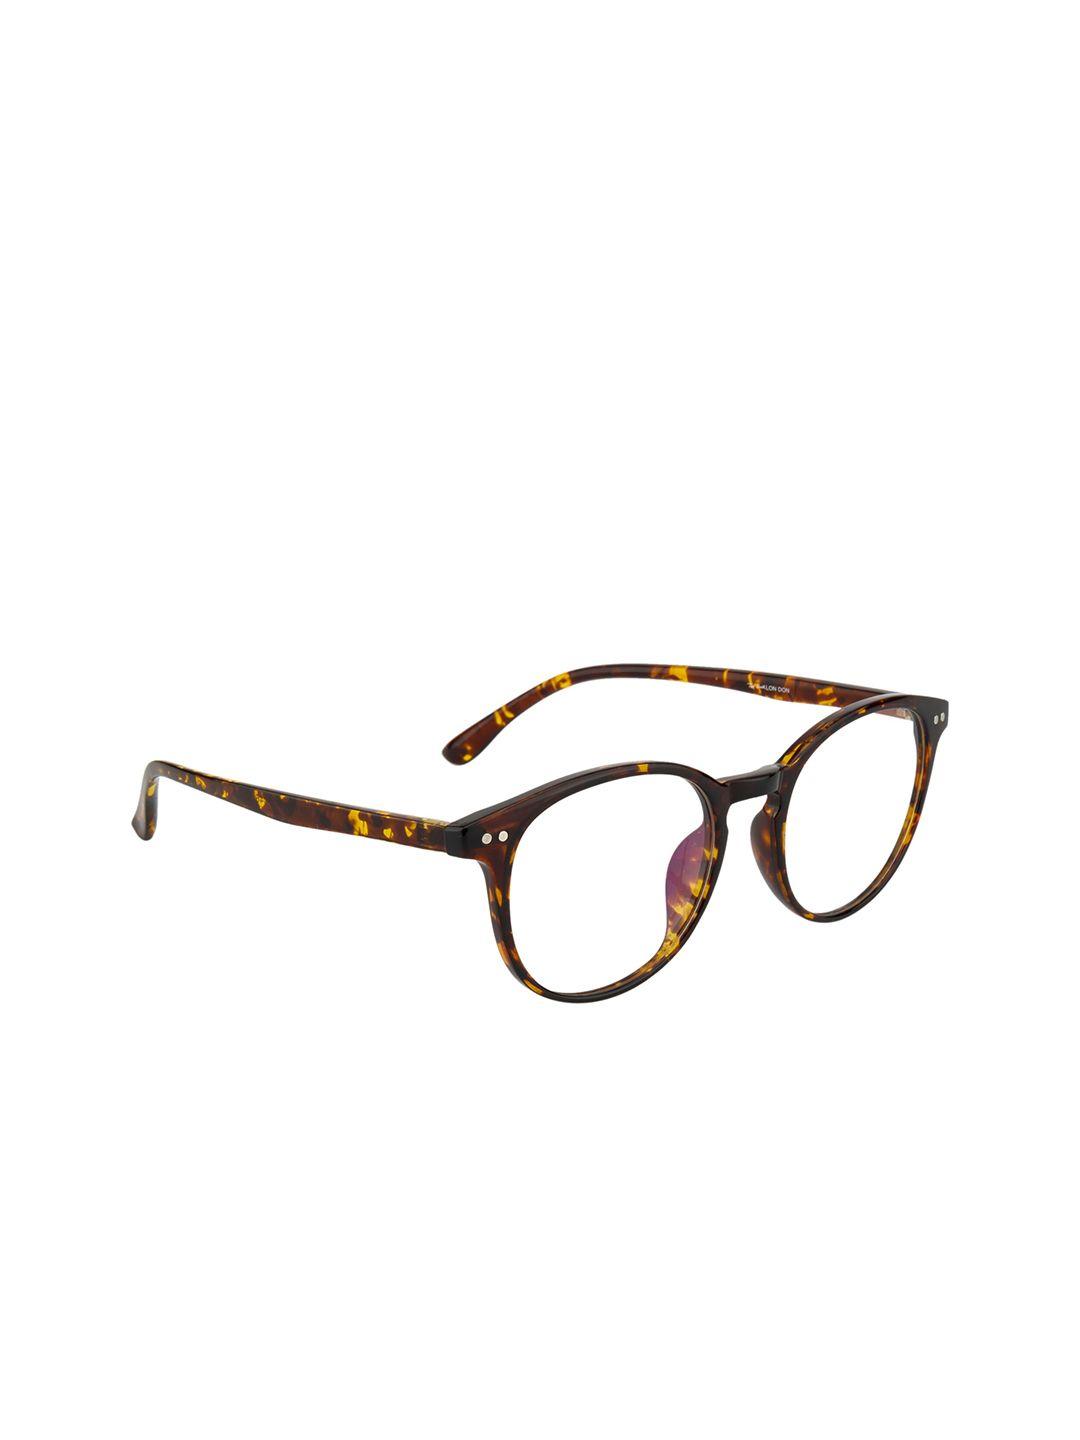 ted smith unisex brown & yellow full rim round frames